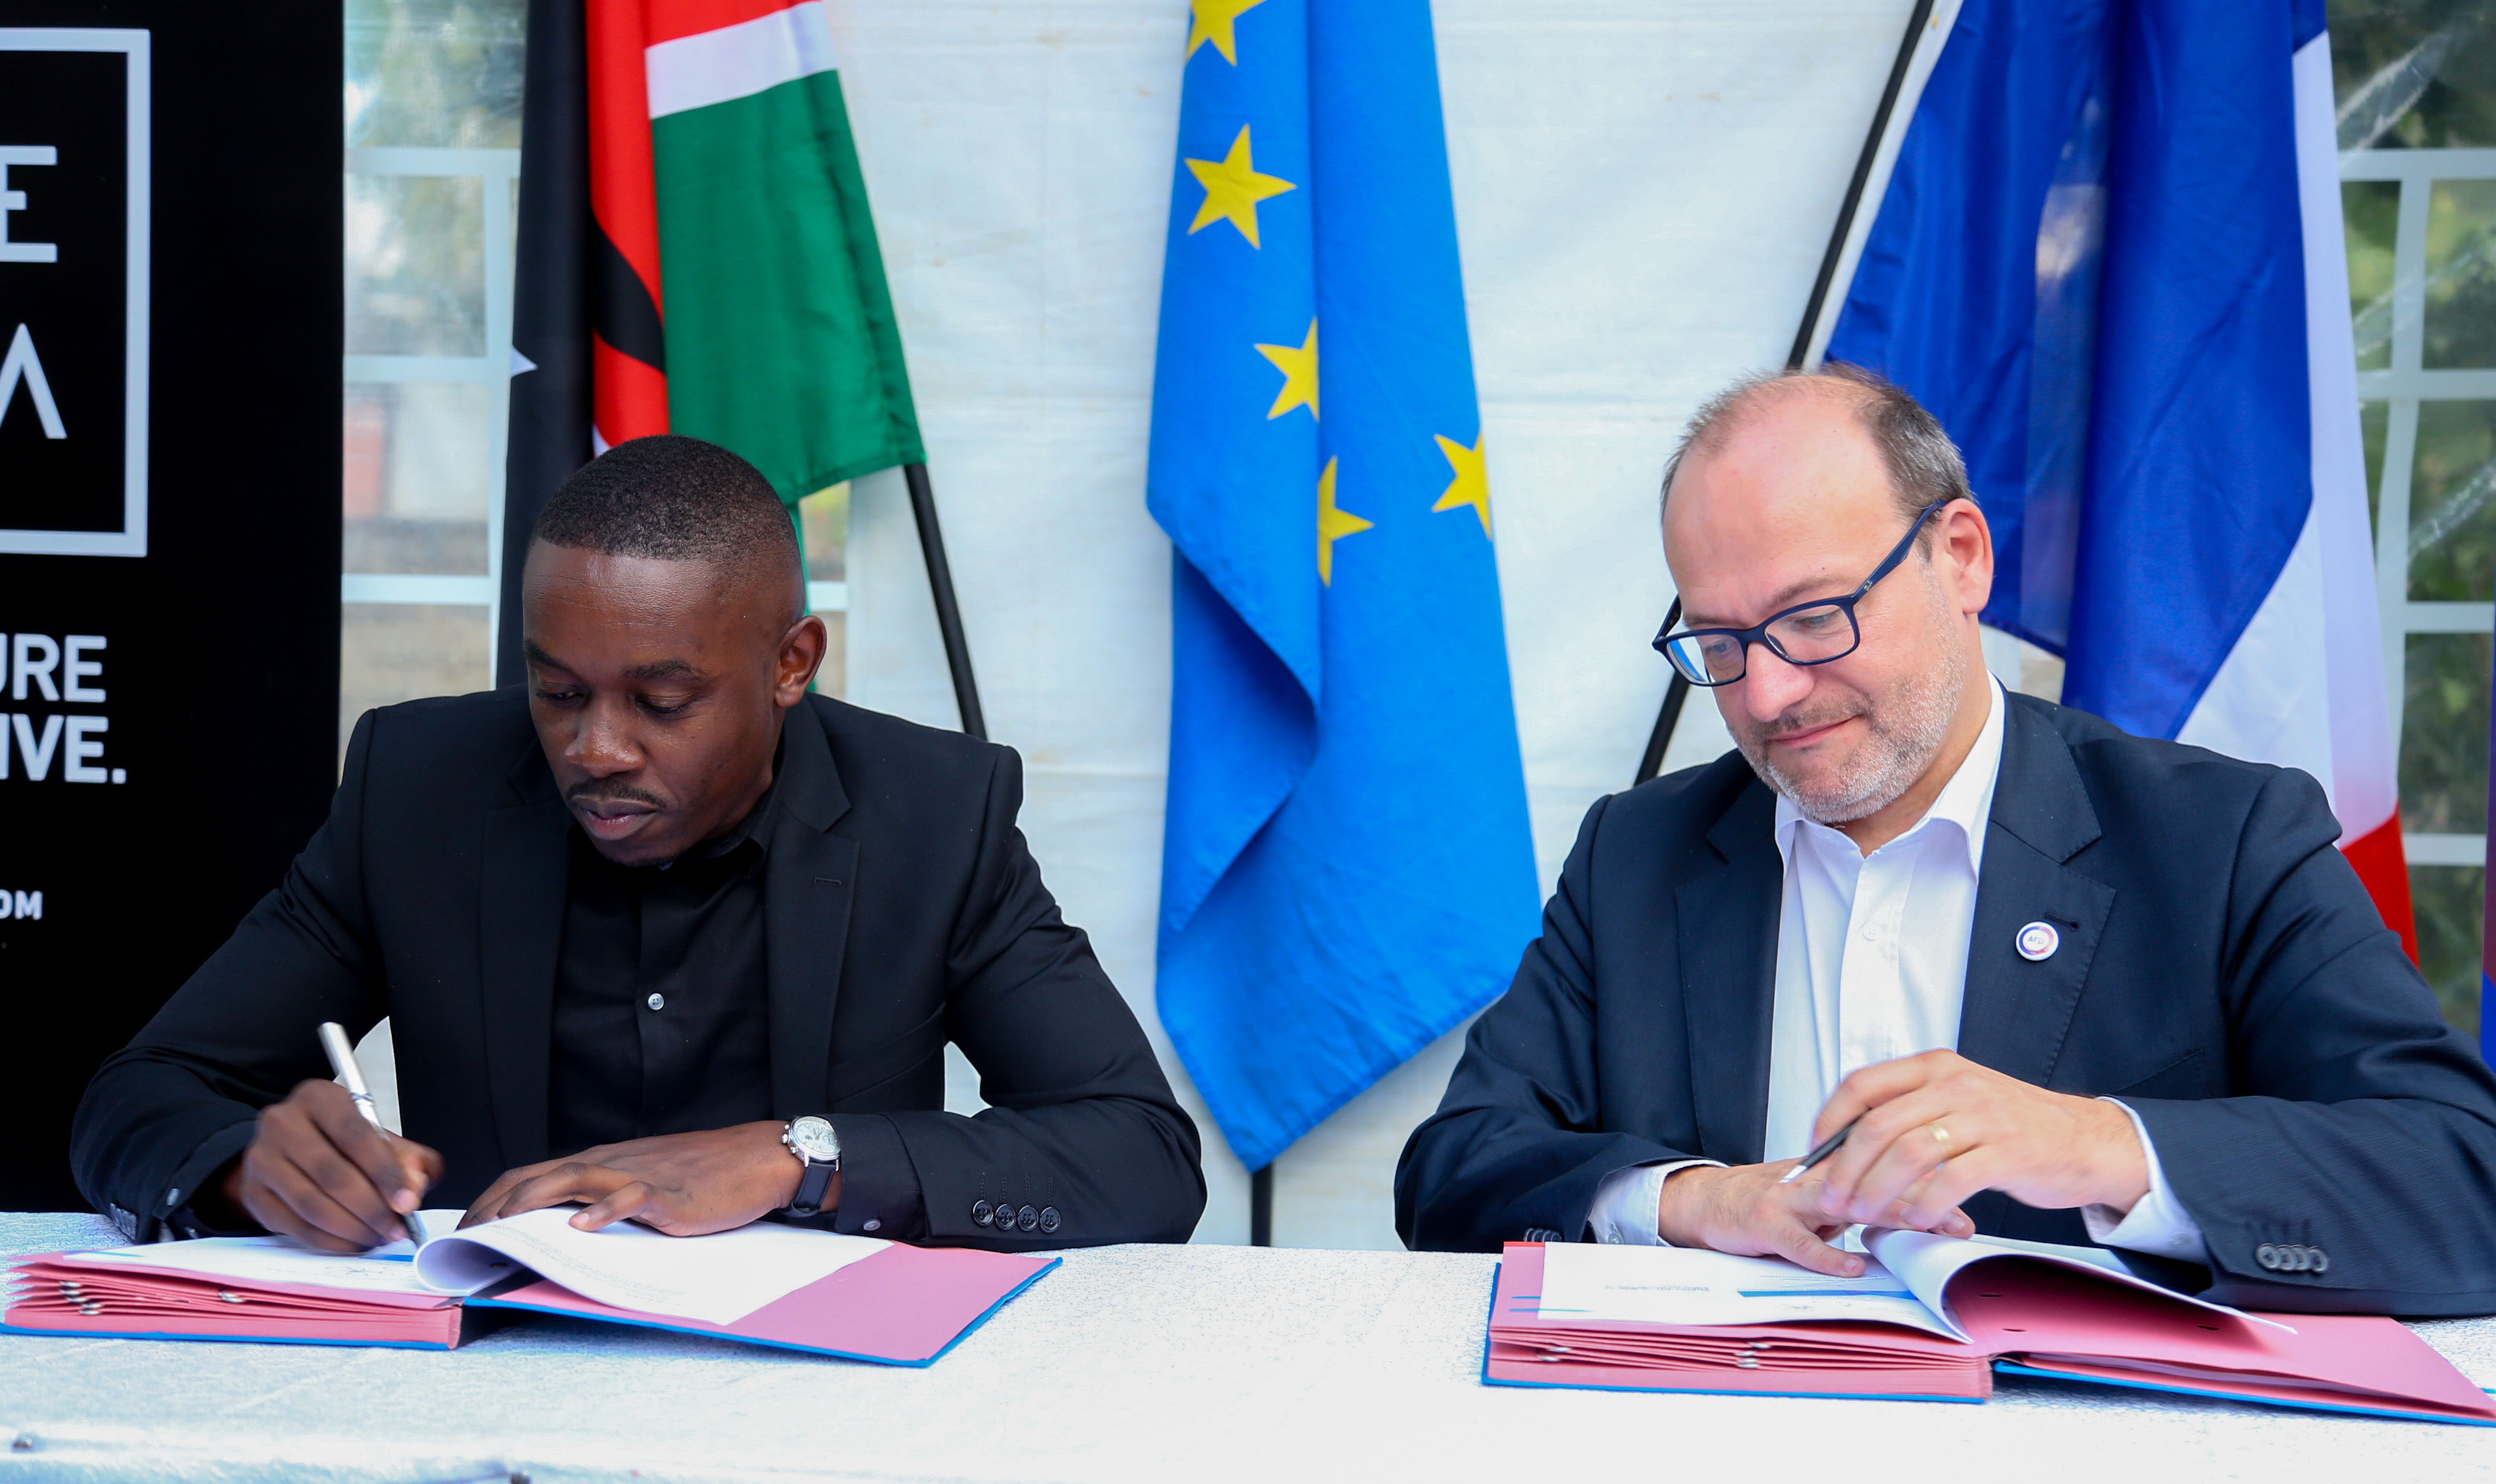 HEVA Managing Partner Mr. George Gachara and AFD’s chief executive officer Mr. Rémy Rioux signing the cooperation agreement